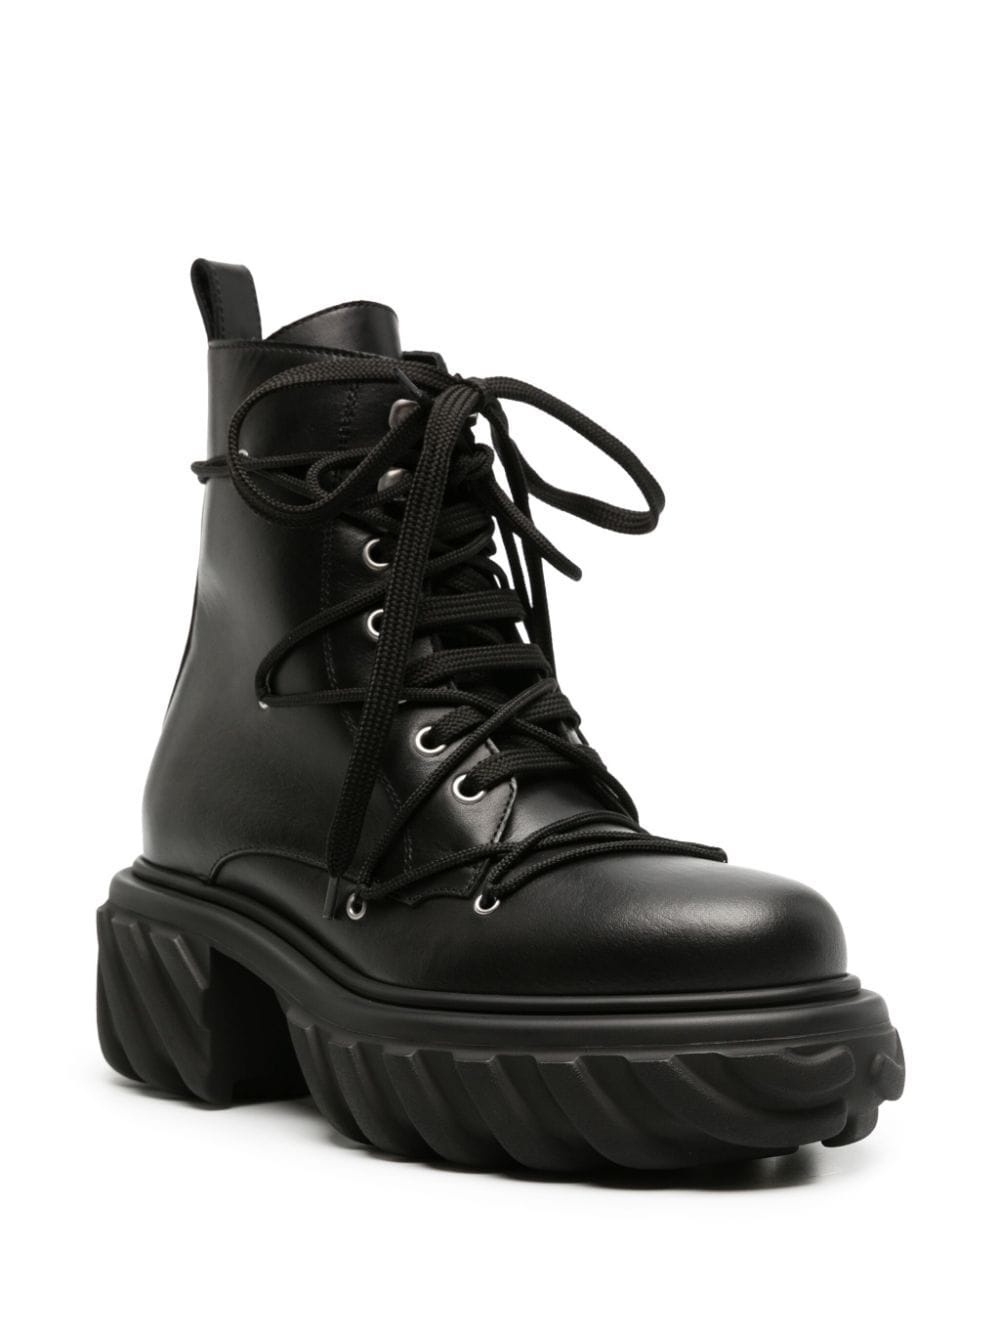 Tractor Motor leather boots - 2